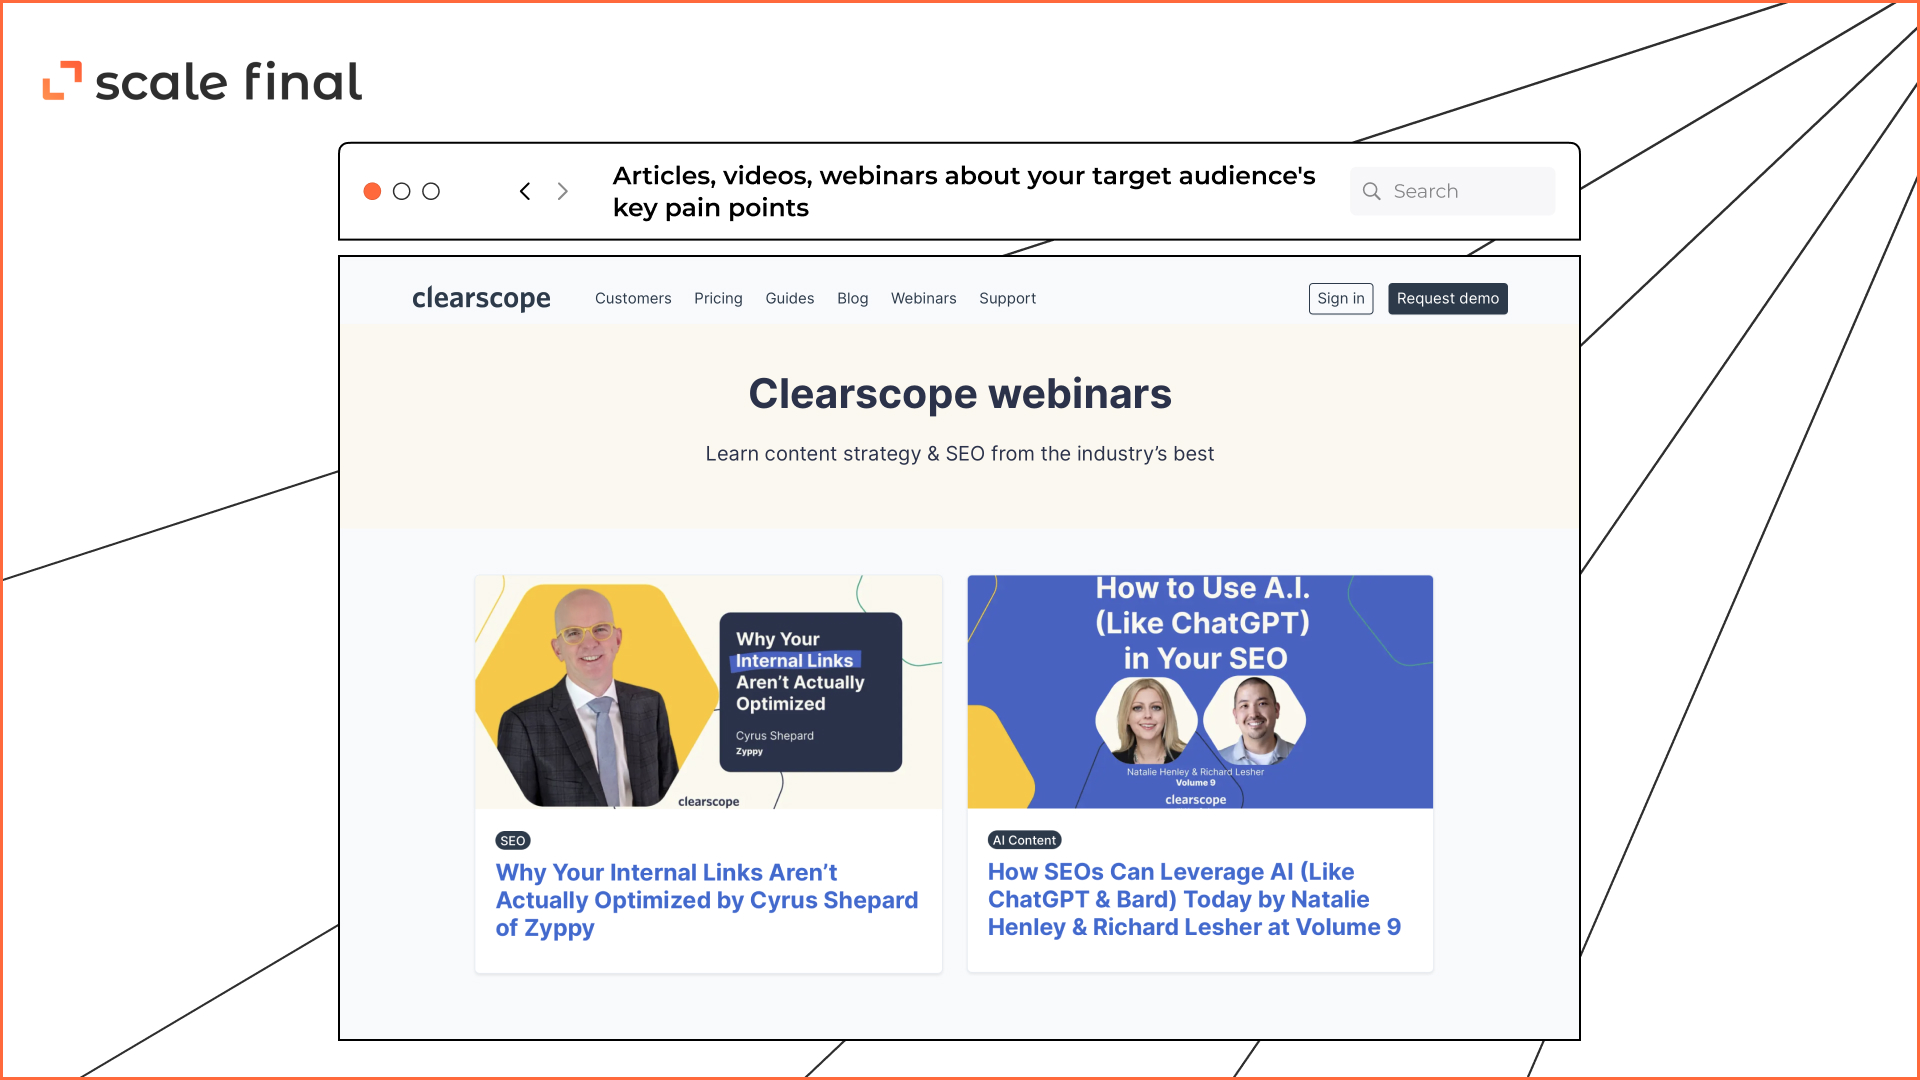 Articles, videos, webinars about your target audience's key pain points. Clearscope webinars